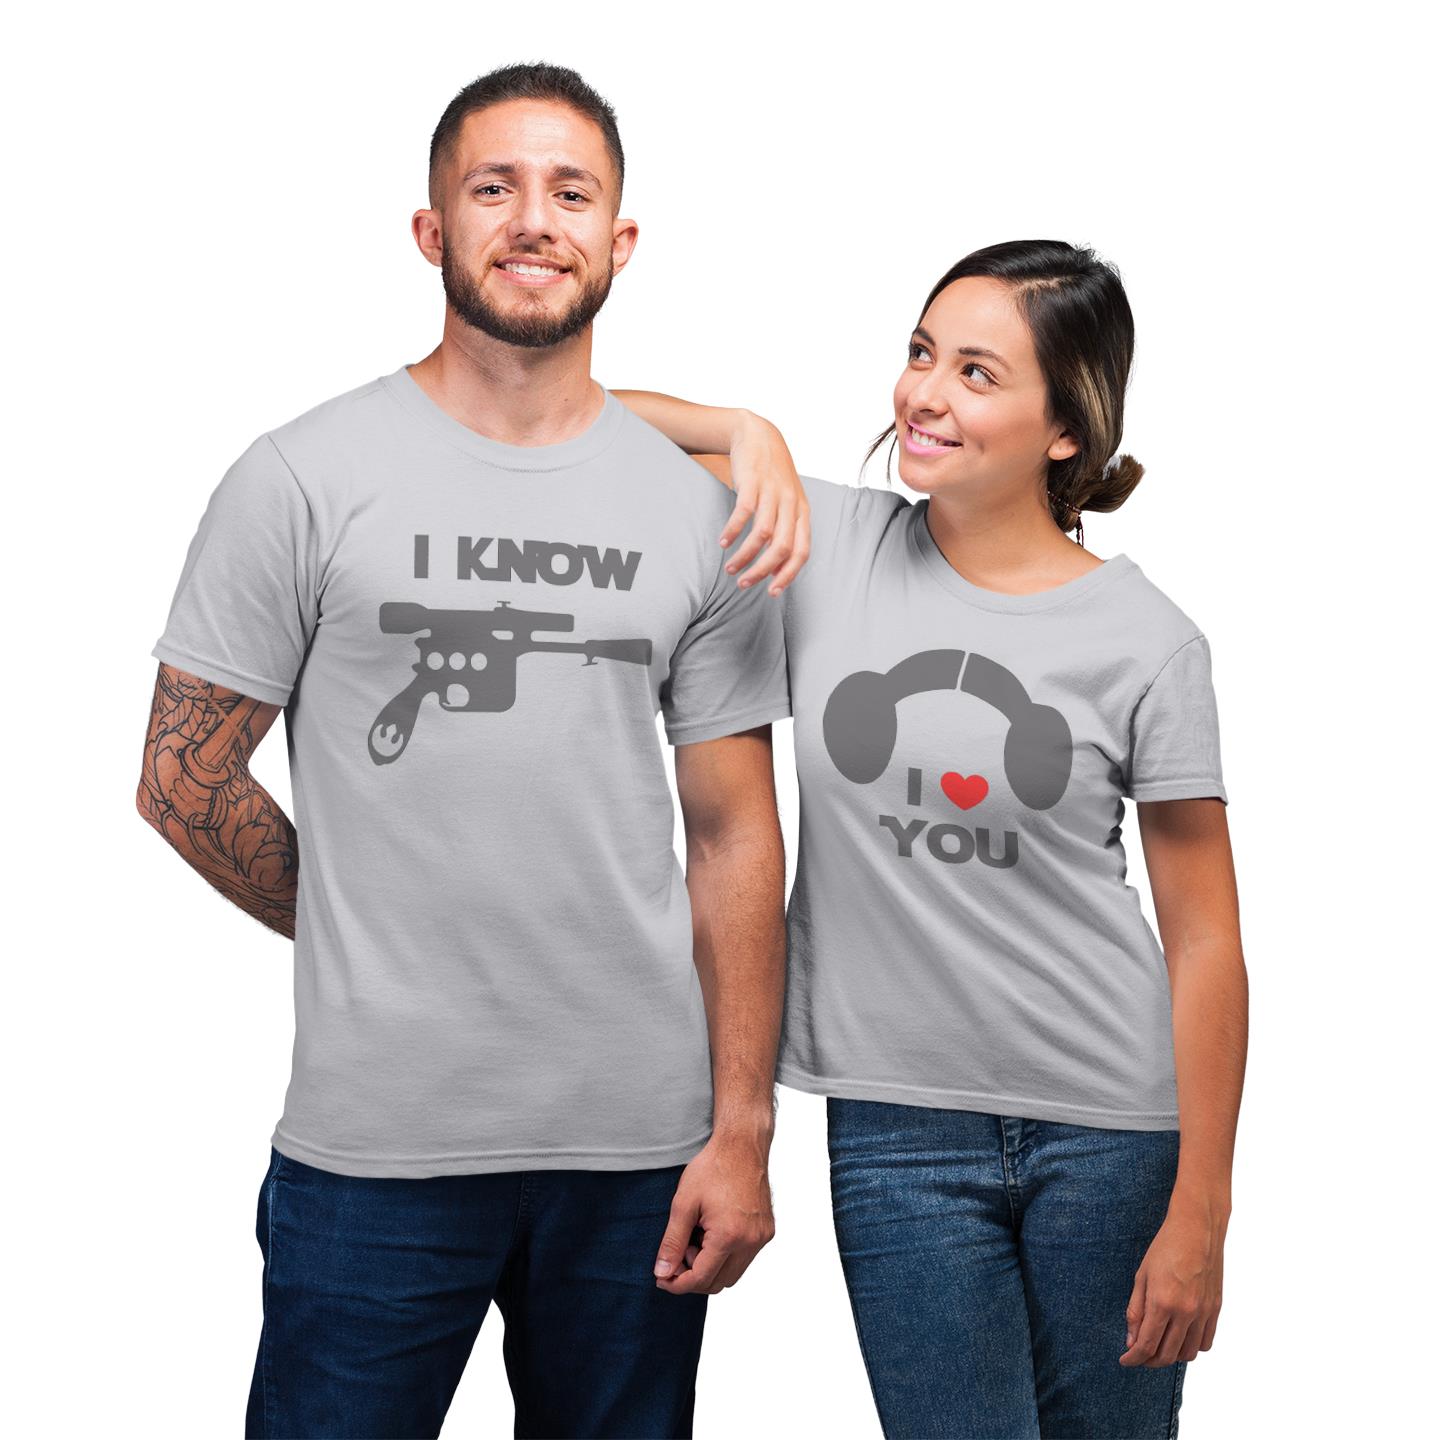 I Love You I Know Couple Matching His And Hers Gift T-Shirt